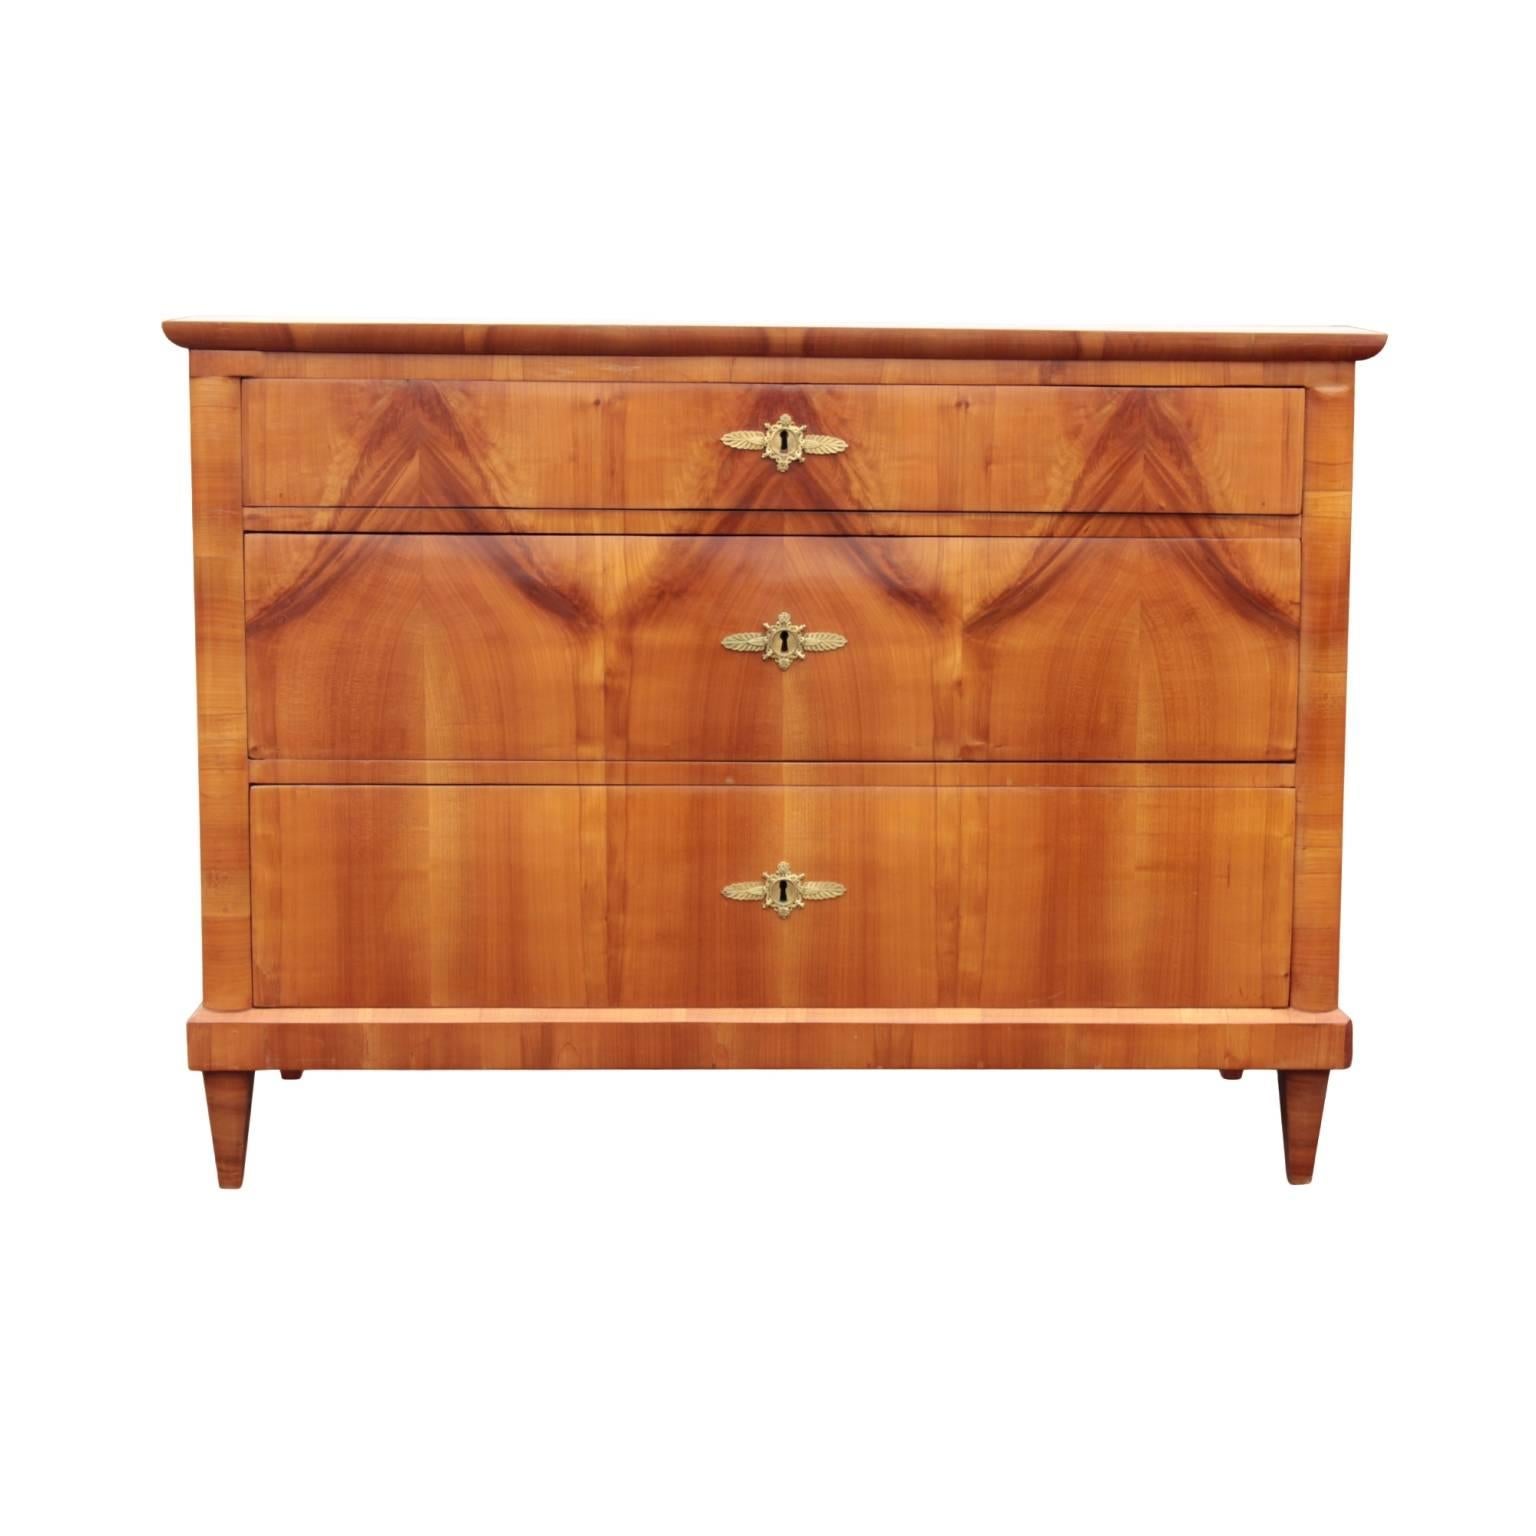 South German chest having subtly molded top and front edges; corpus with three drawers, top drawer of smaller height, in beautifully book-matched cherry with wood grain forming abstract swags. Drawers fitted with centrally positioned French